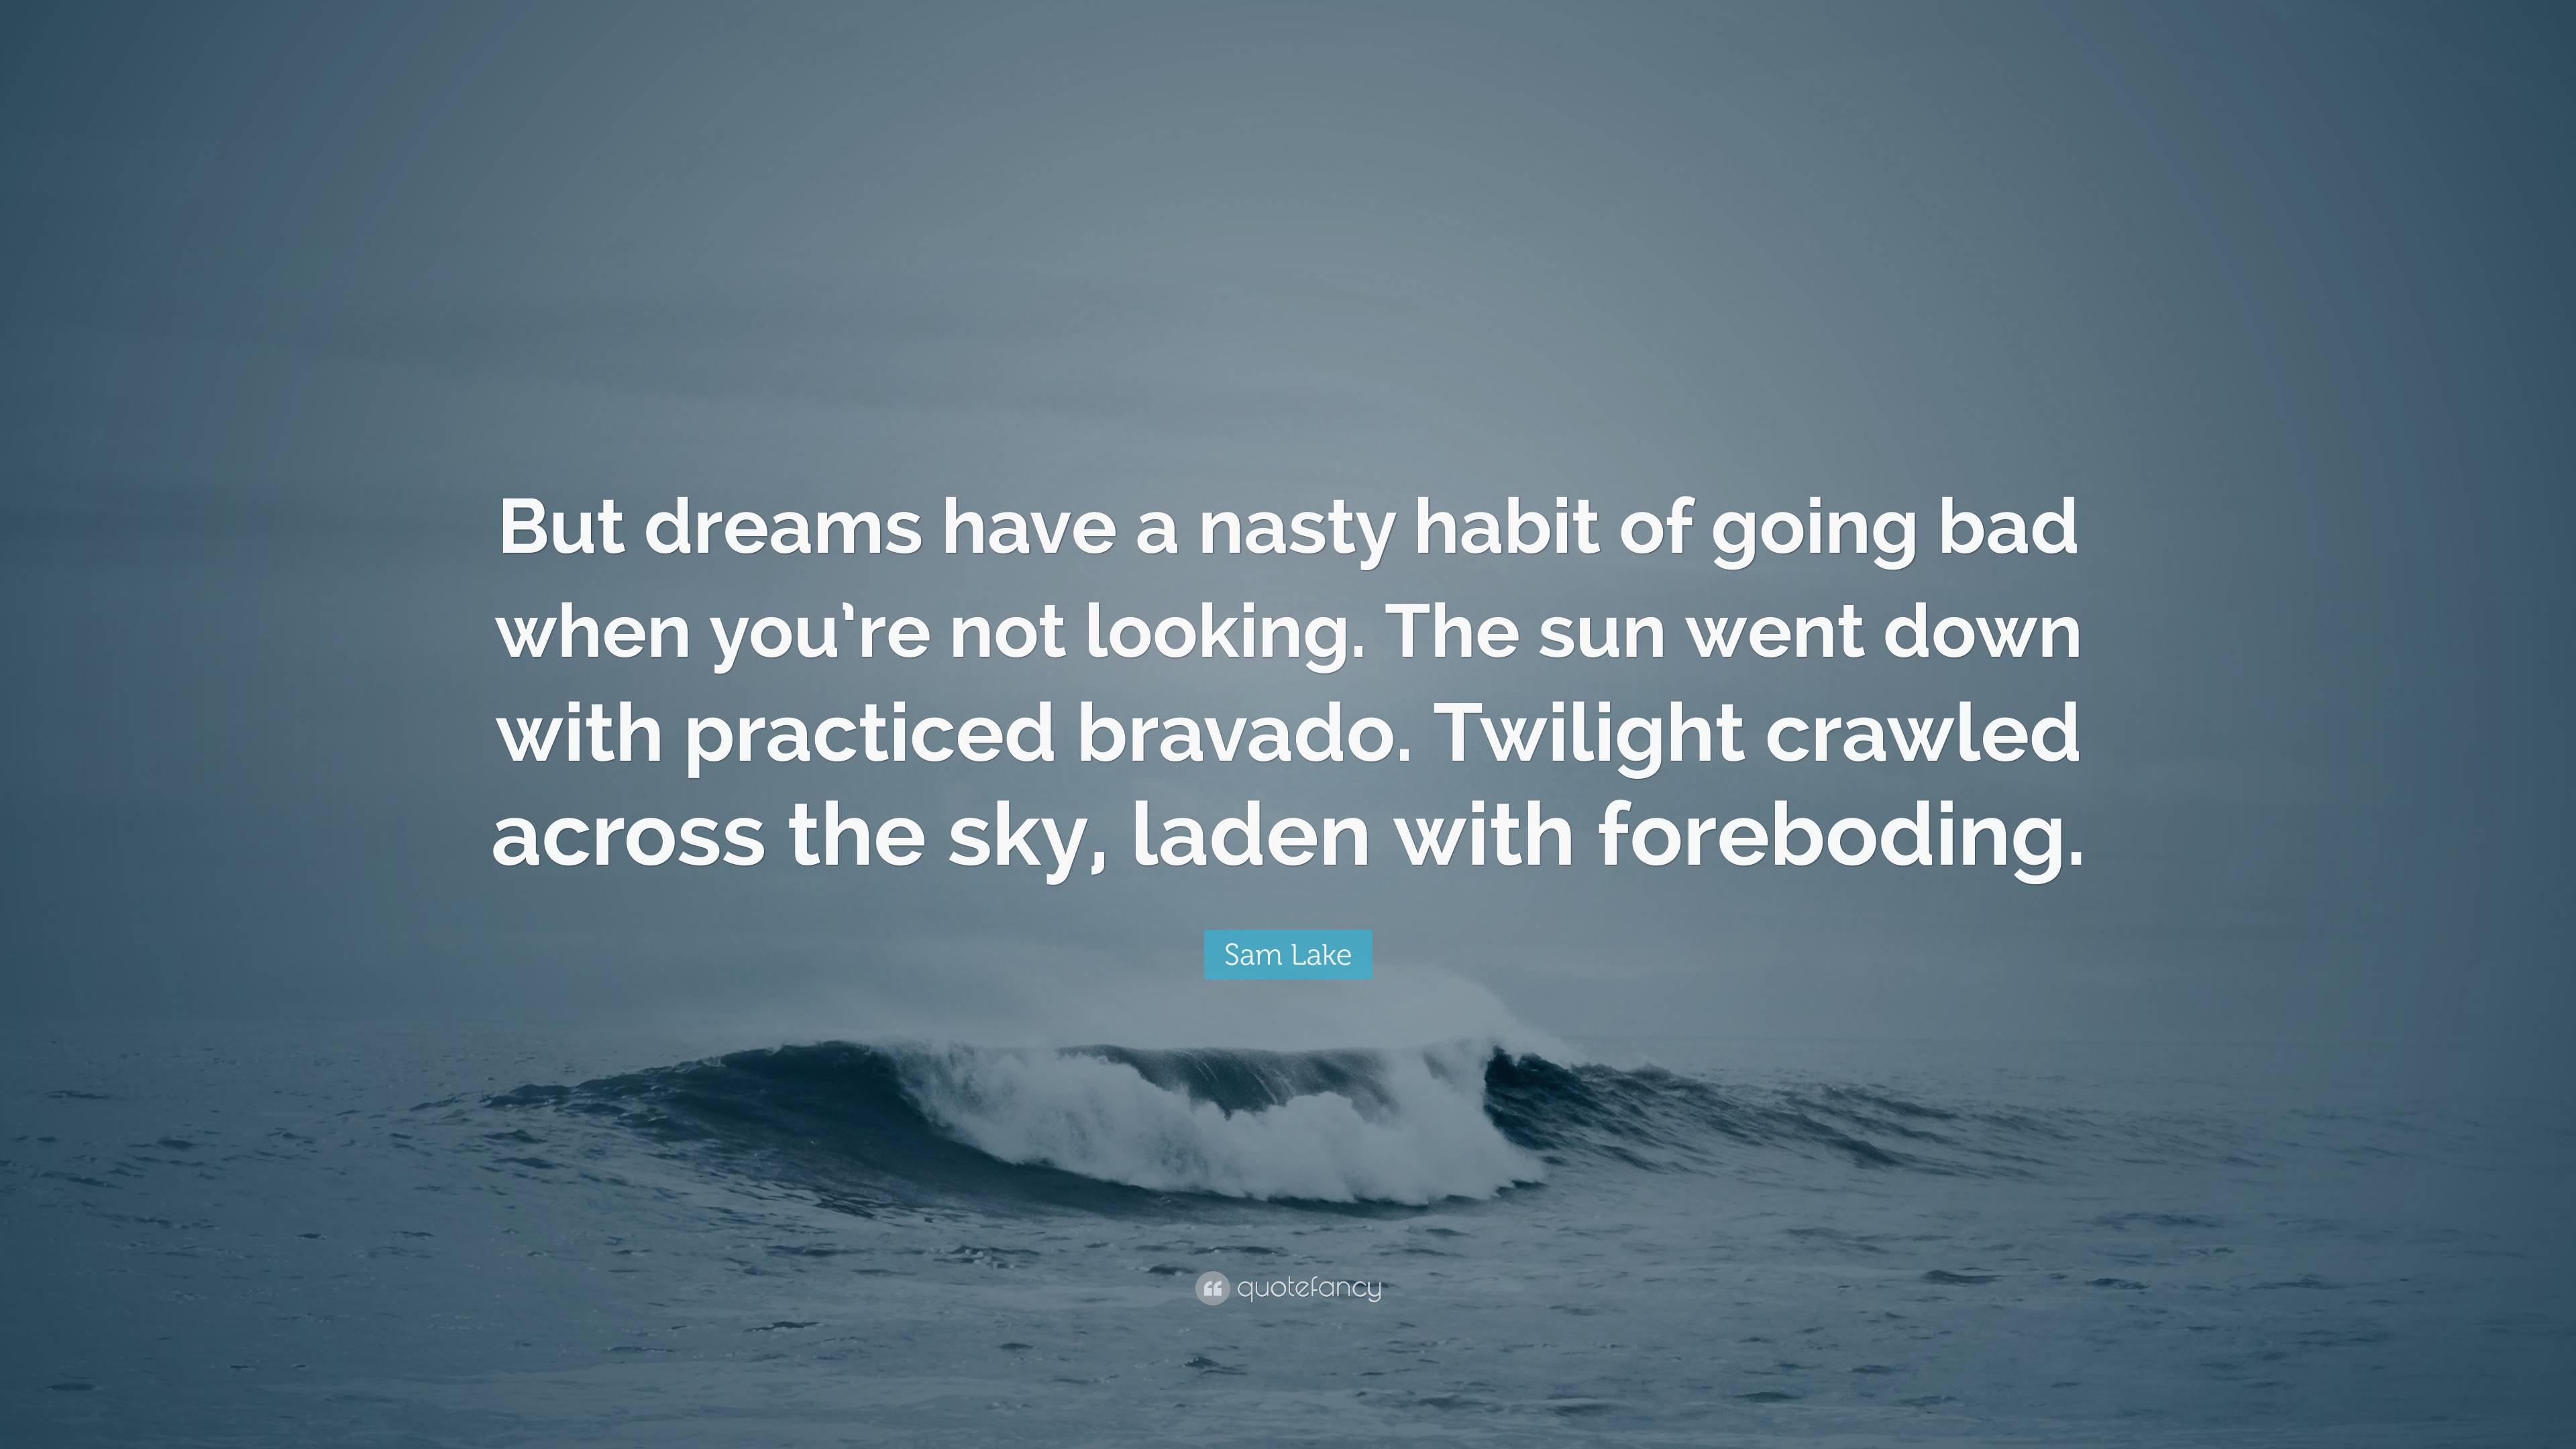 Sam Lake Quote: “But dreams have a nasty habit of going bad when